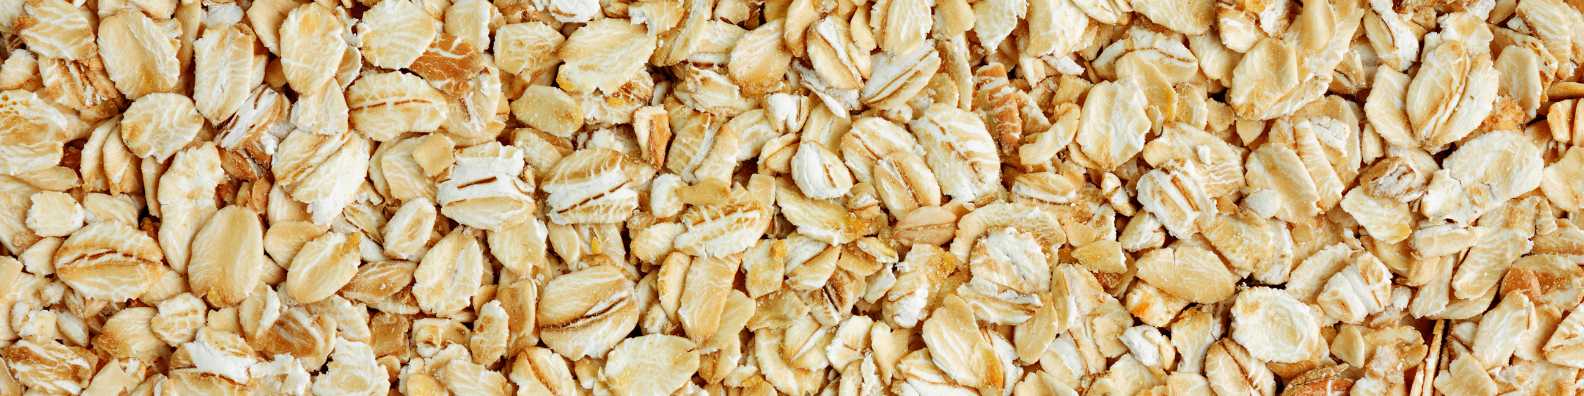 Oats 101: A Comprehensive Guide to Understanding and Enjoying Oats